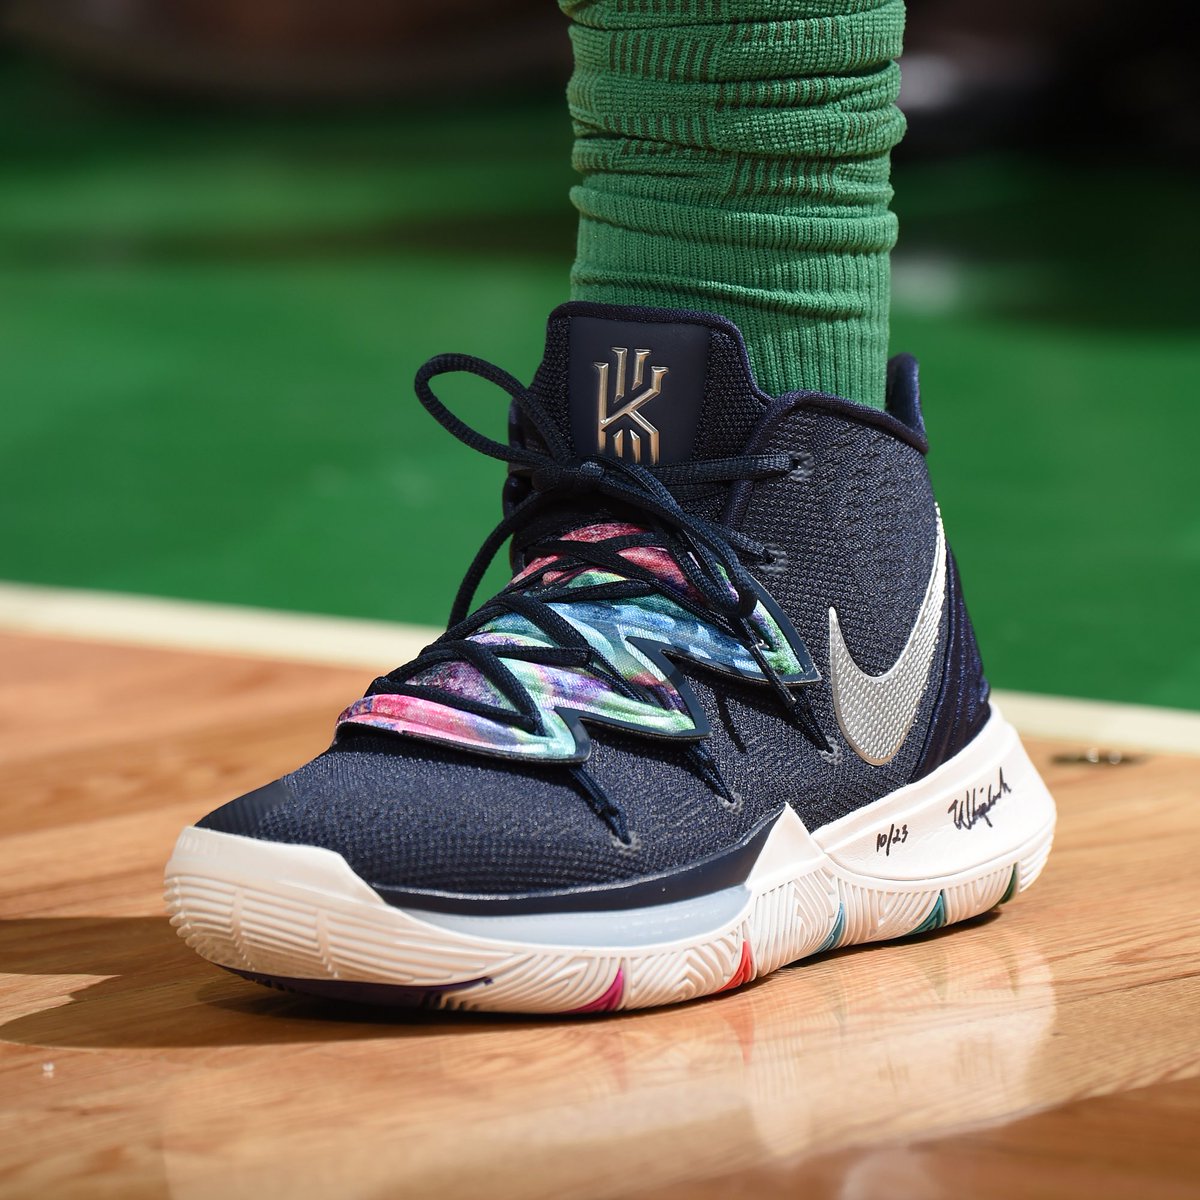 Nike KYRIE 5 EP Basketball shoes For men White Black Red